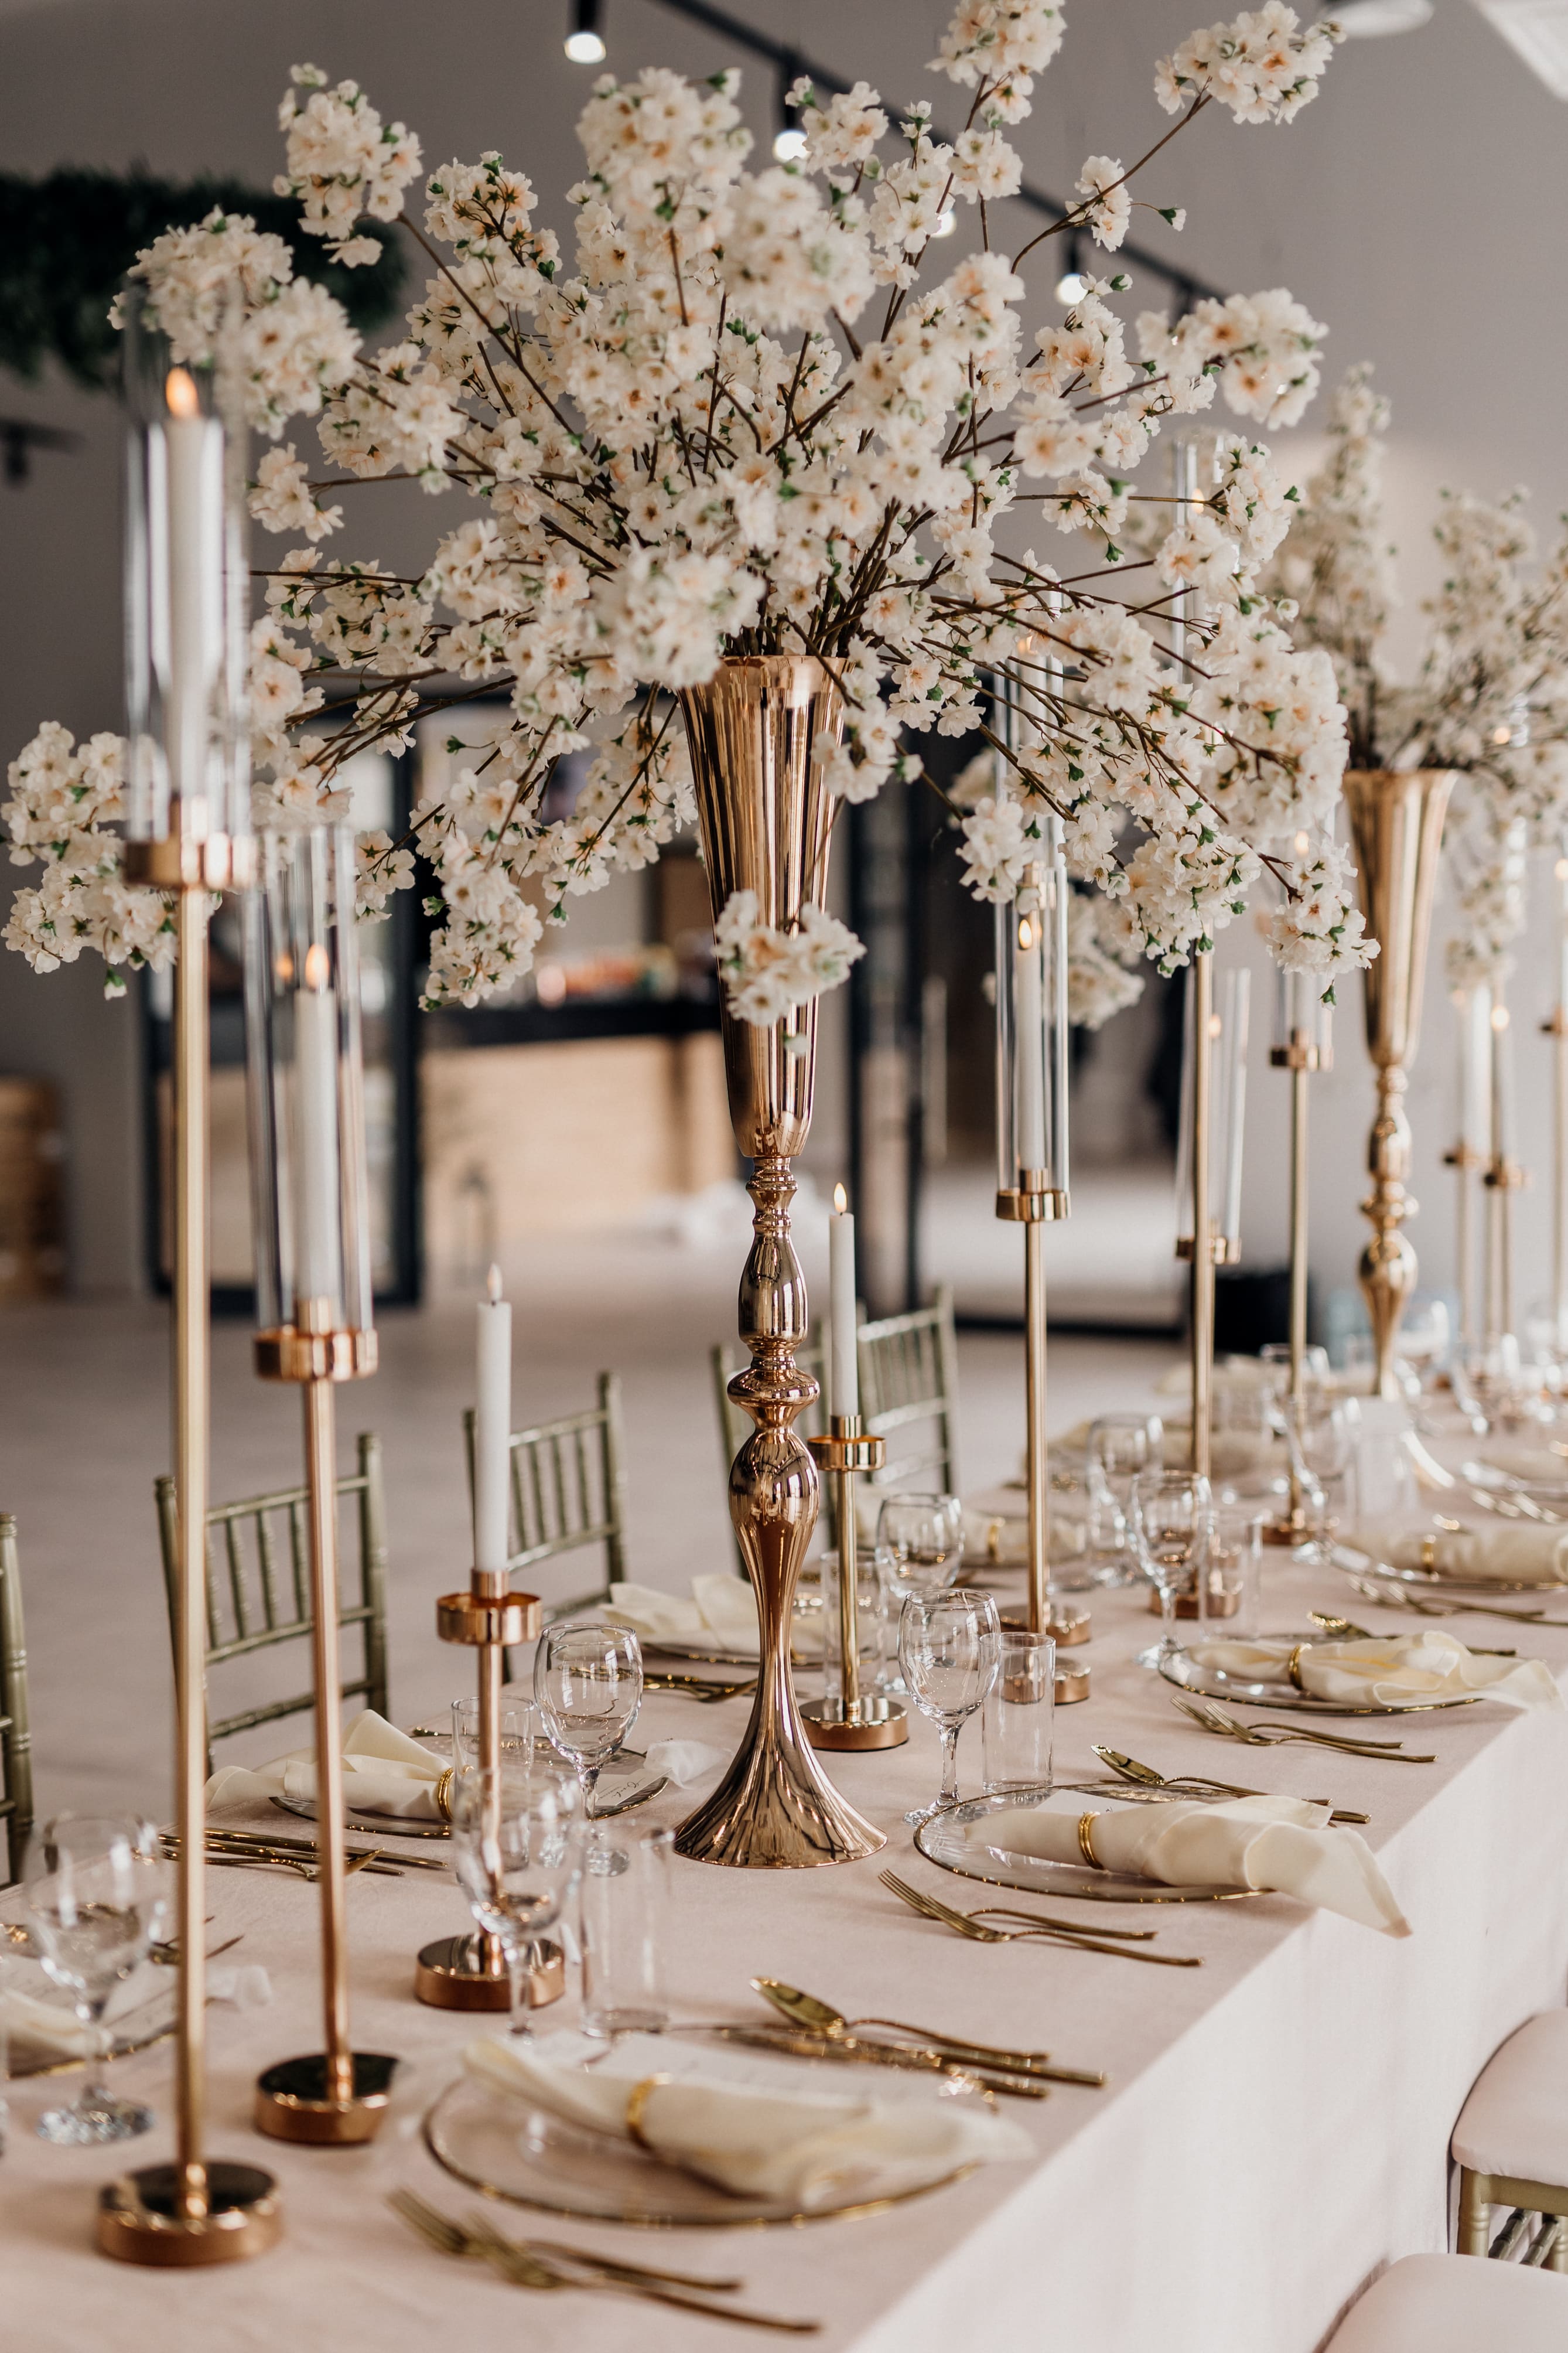 A wedding table with decorations